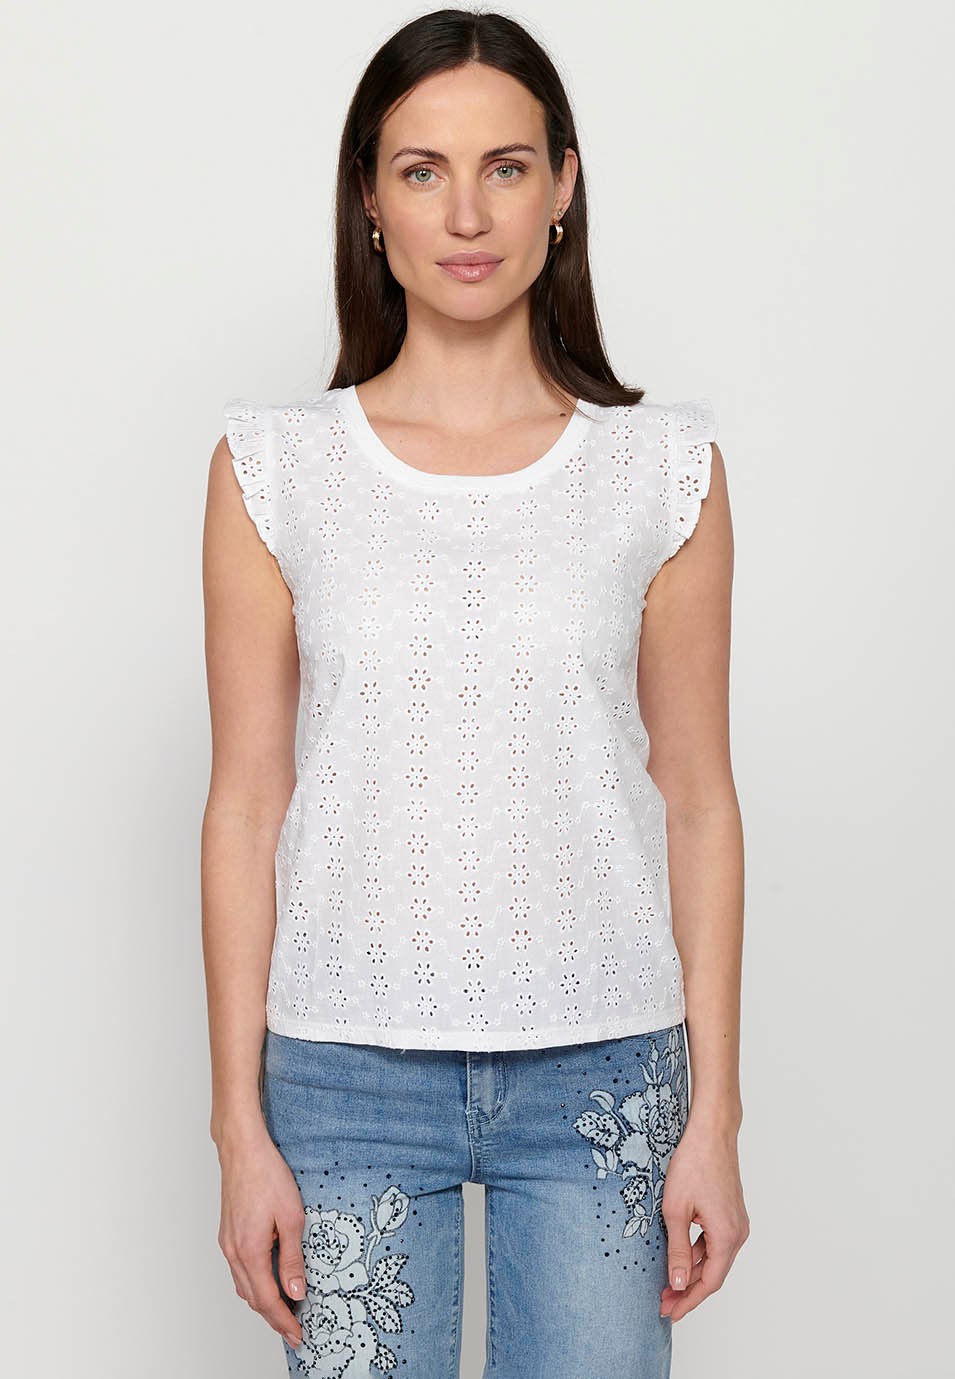 Short sleeve t-shirt, ruffle on the shoulders, white color for women